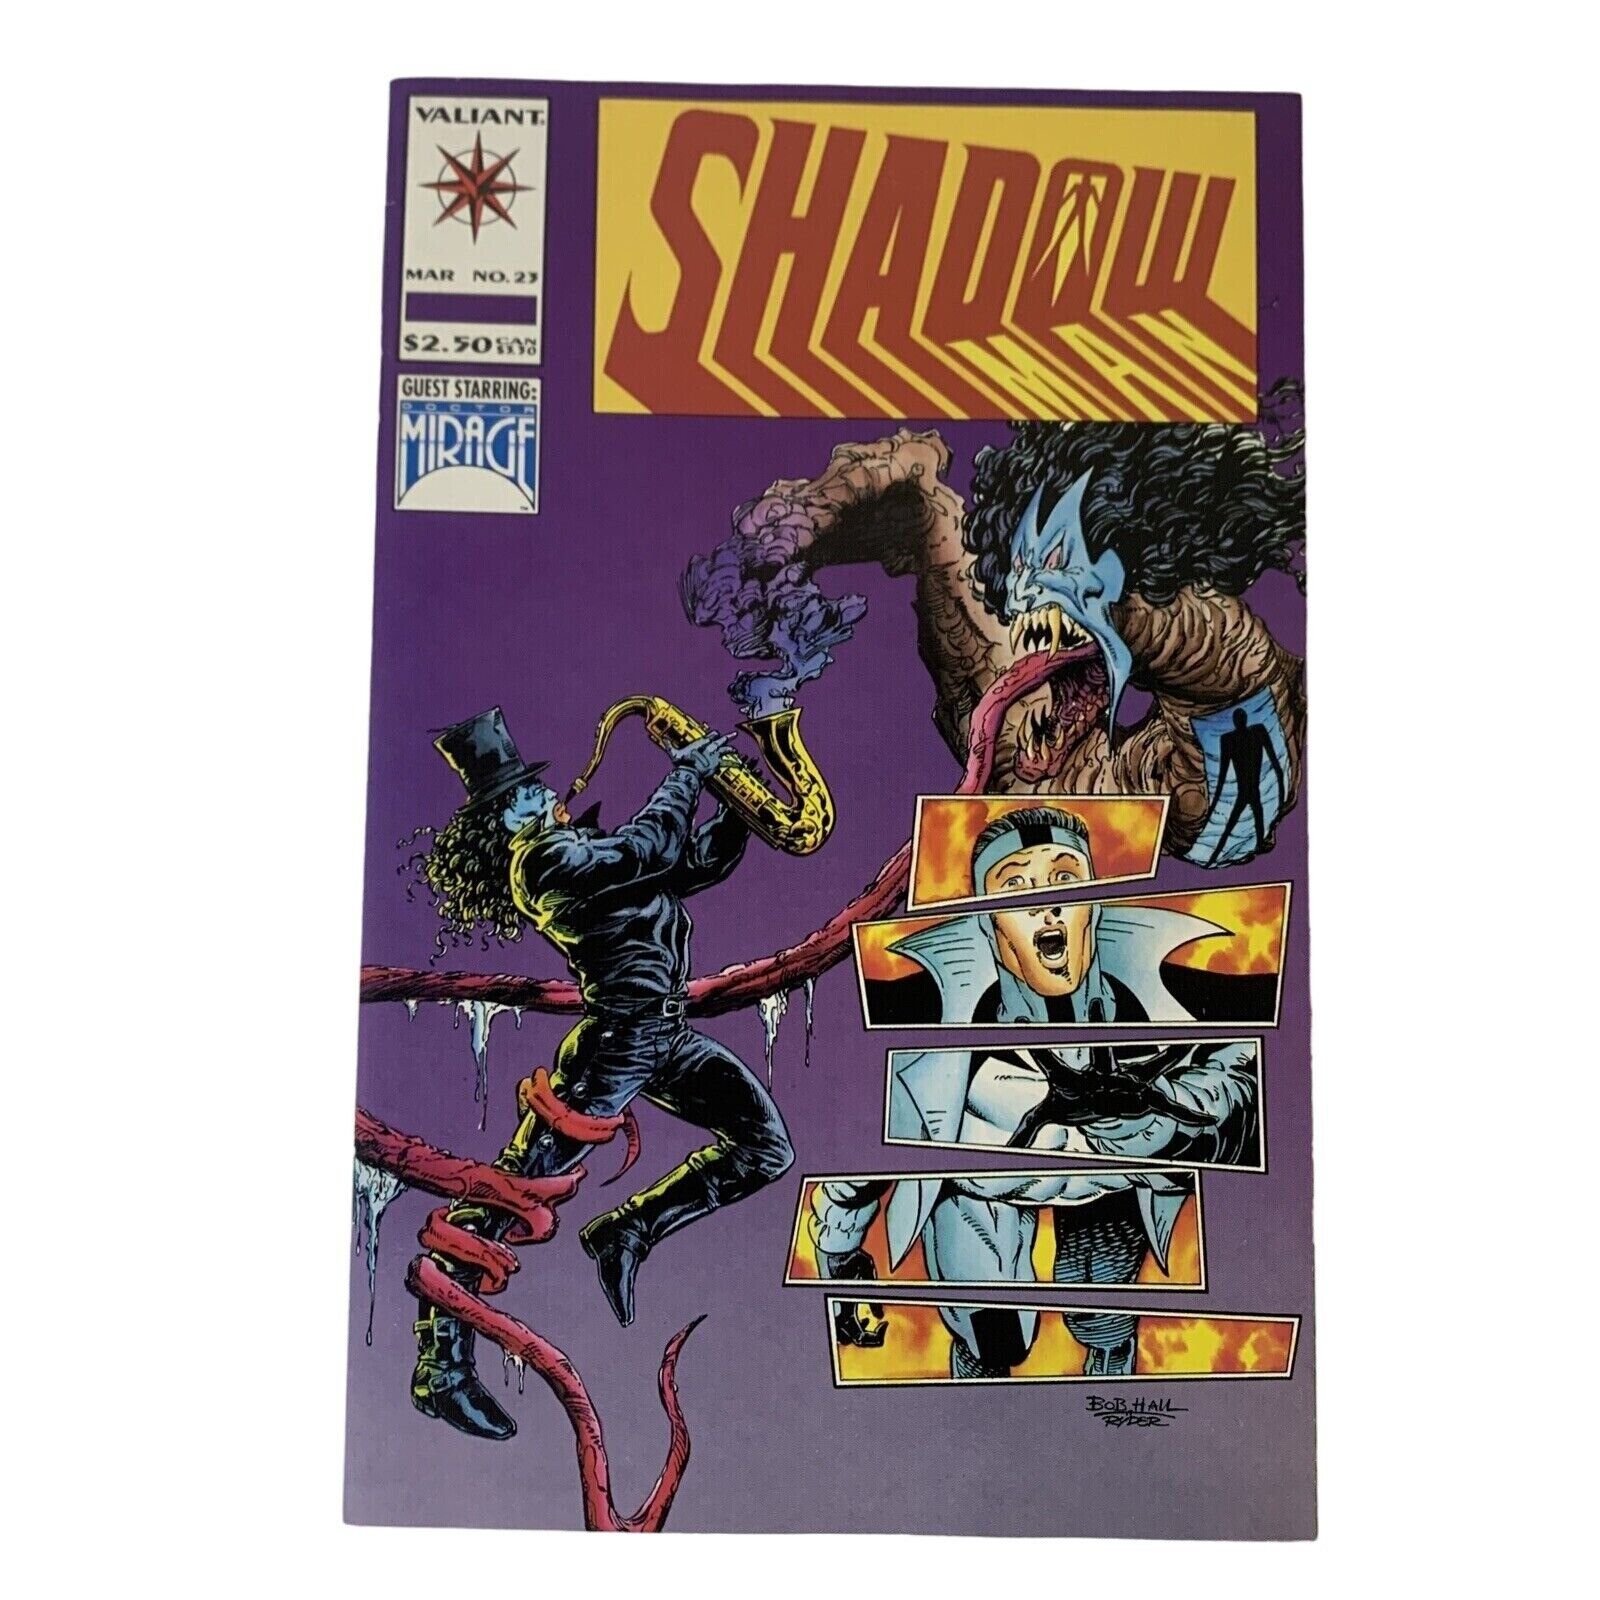 Shadowman #23 (March 1994, Valiant) Combined Shipping